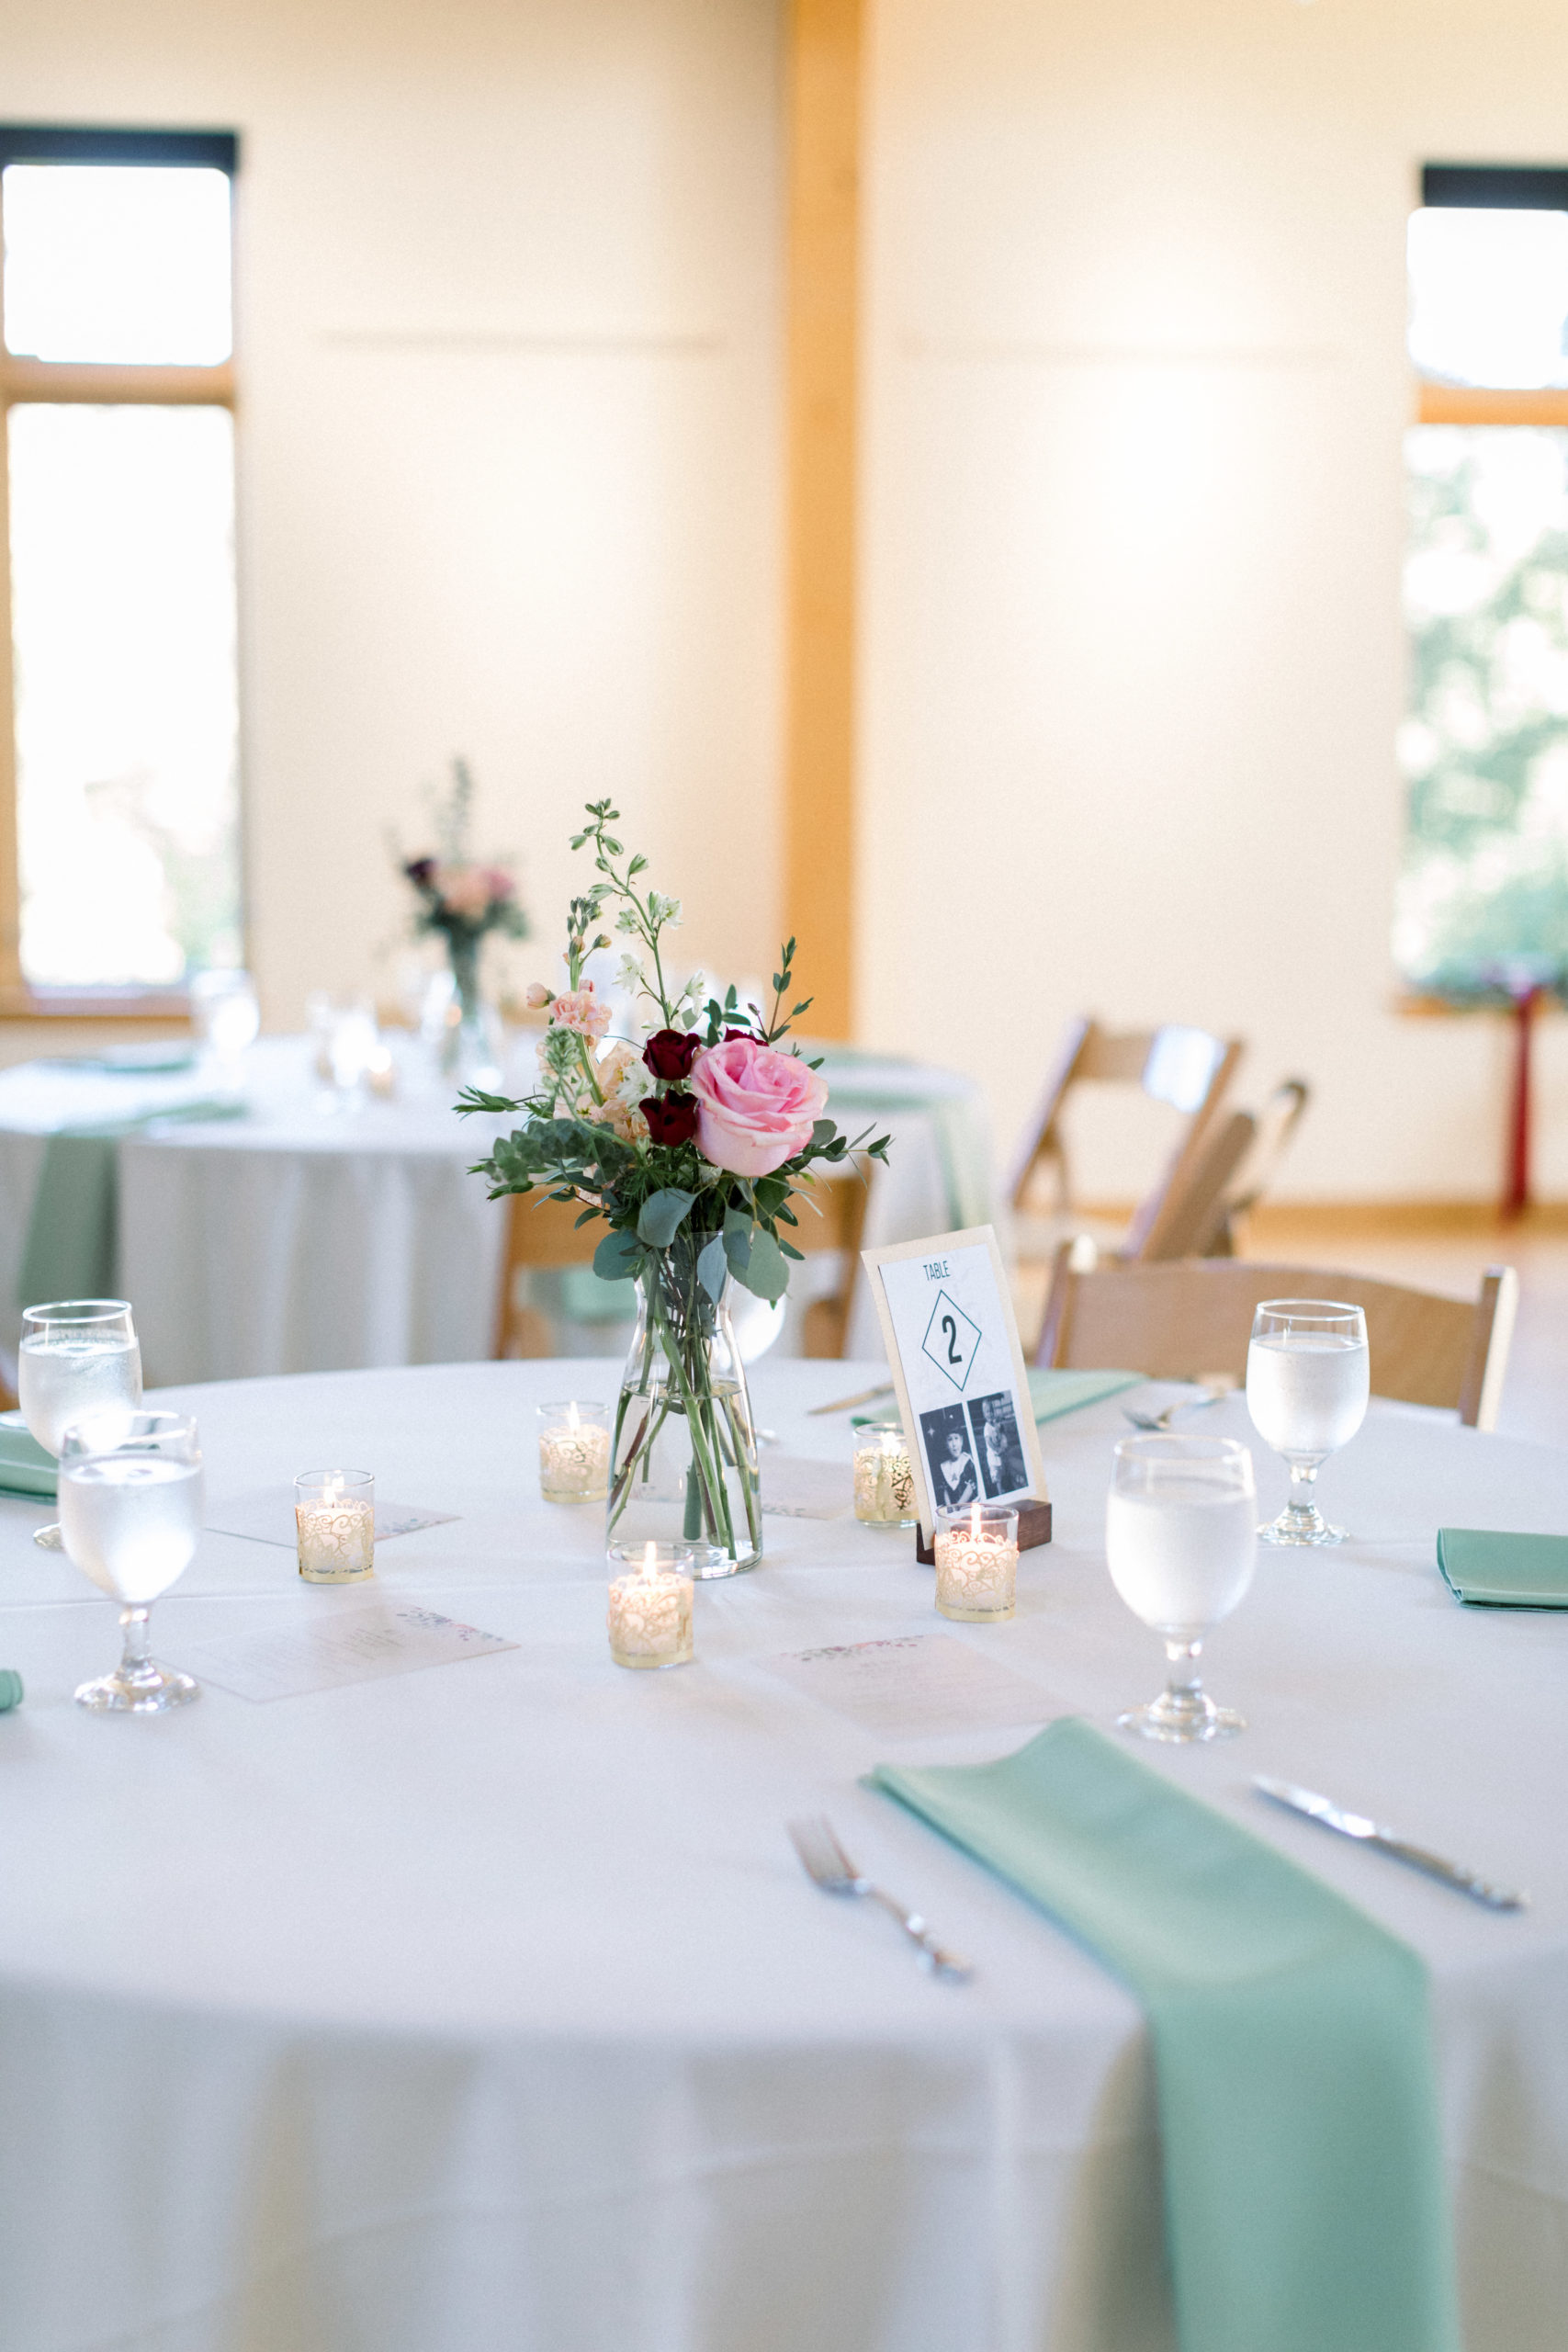 wedding table with white table cloths, floral centerpieces at chic Howard county conservancy wedding reception